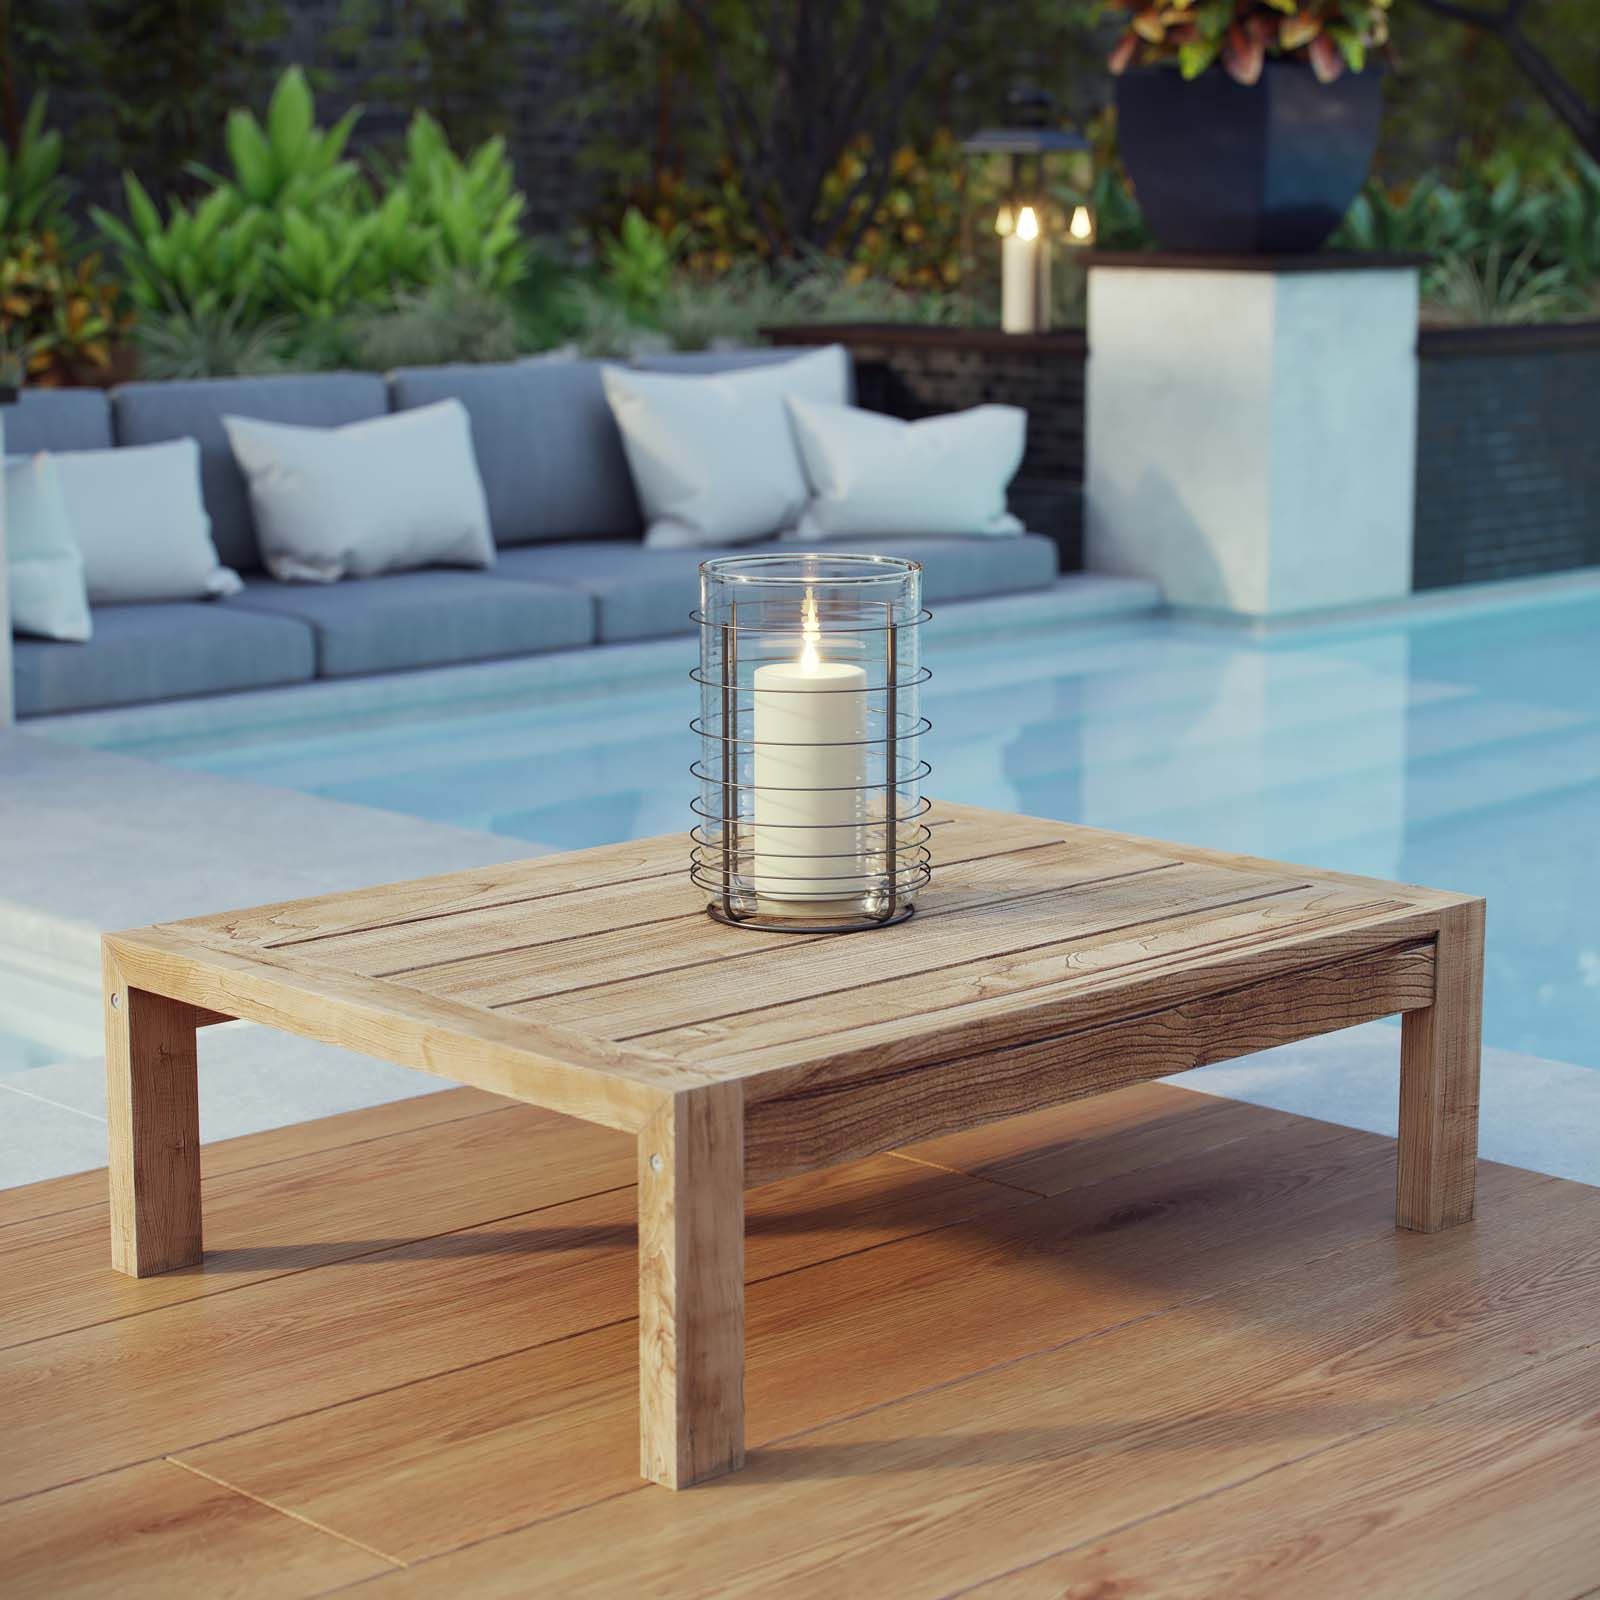 Upland Outdoor Patio Wood Coffee Table Natural Pertaining To Modern Outdoor Patio Coffee Tables (View 11 of 20)